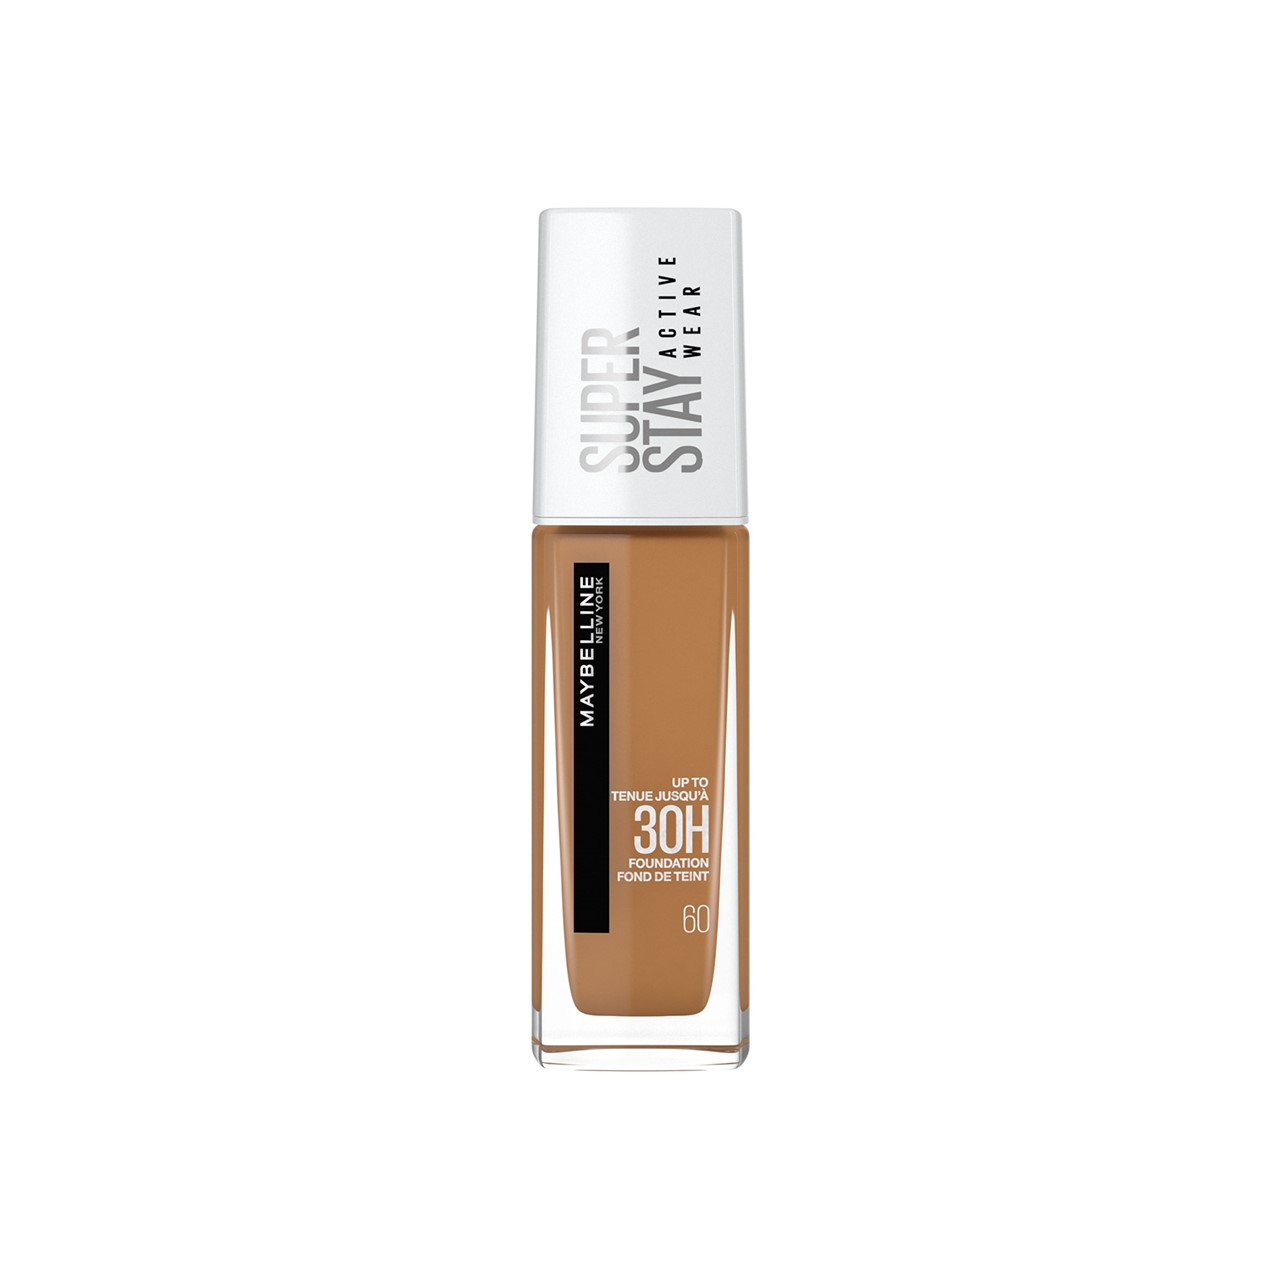 Super USA Wear Foundation Buy 30h · Active Stay Maybelline